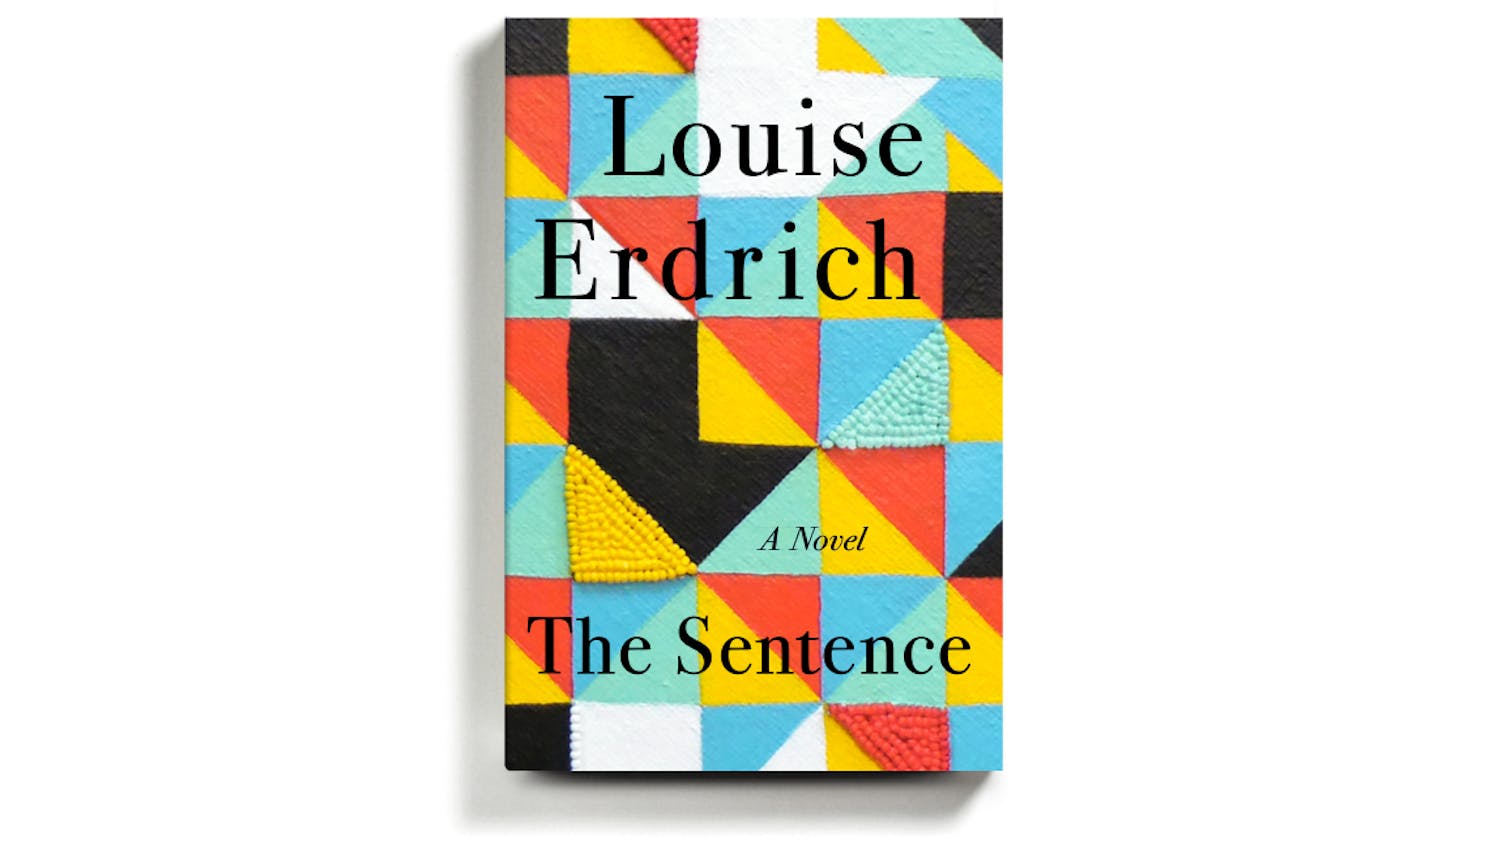 “The Sentence” by Louise Erdrich book cover art